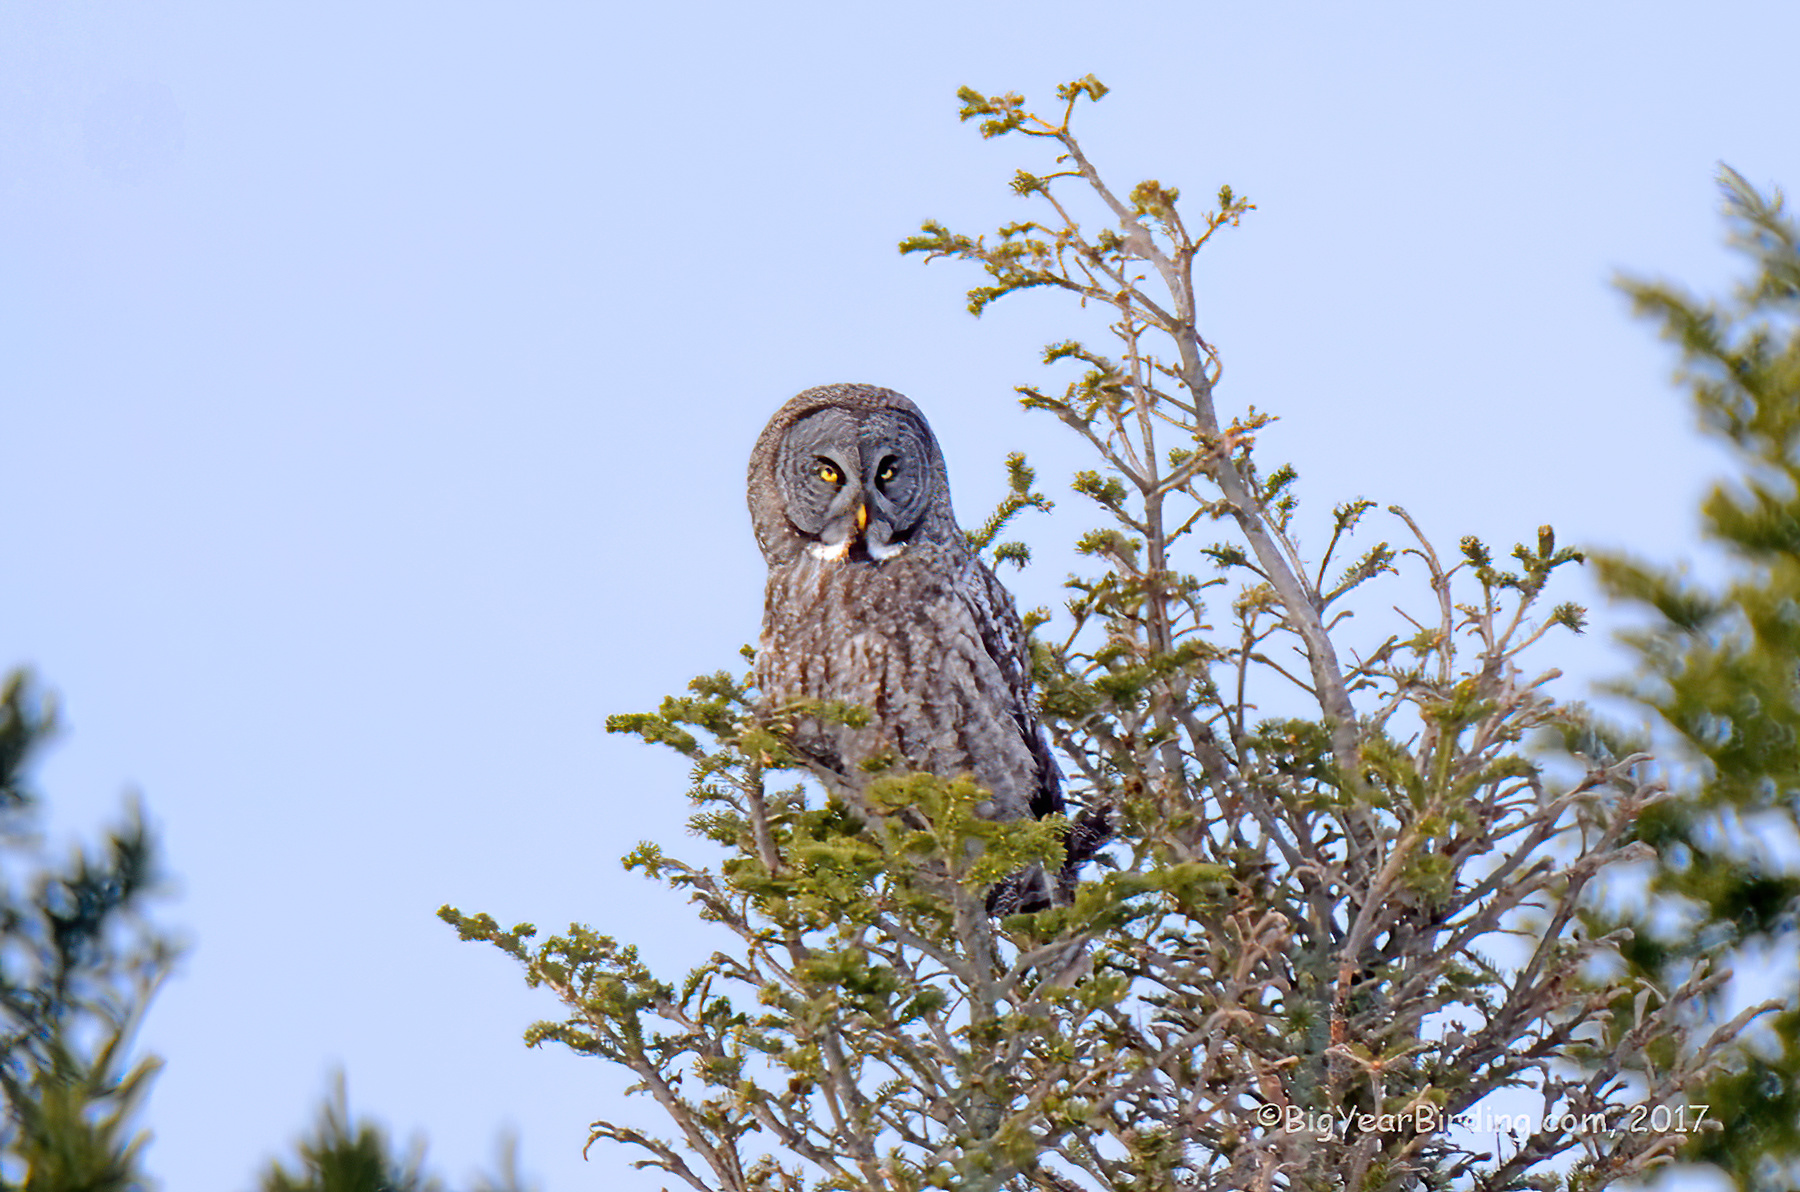 The Great Gray Owl I never saw